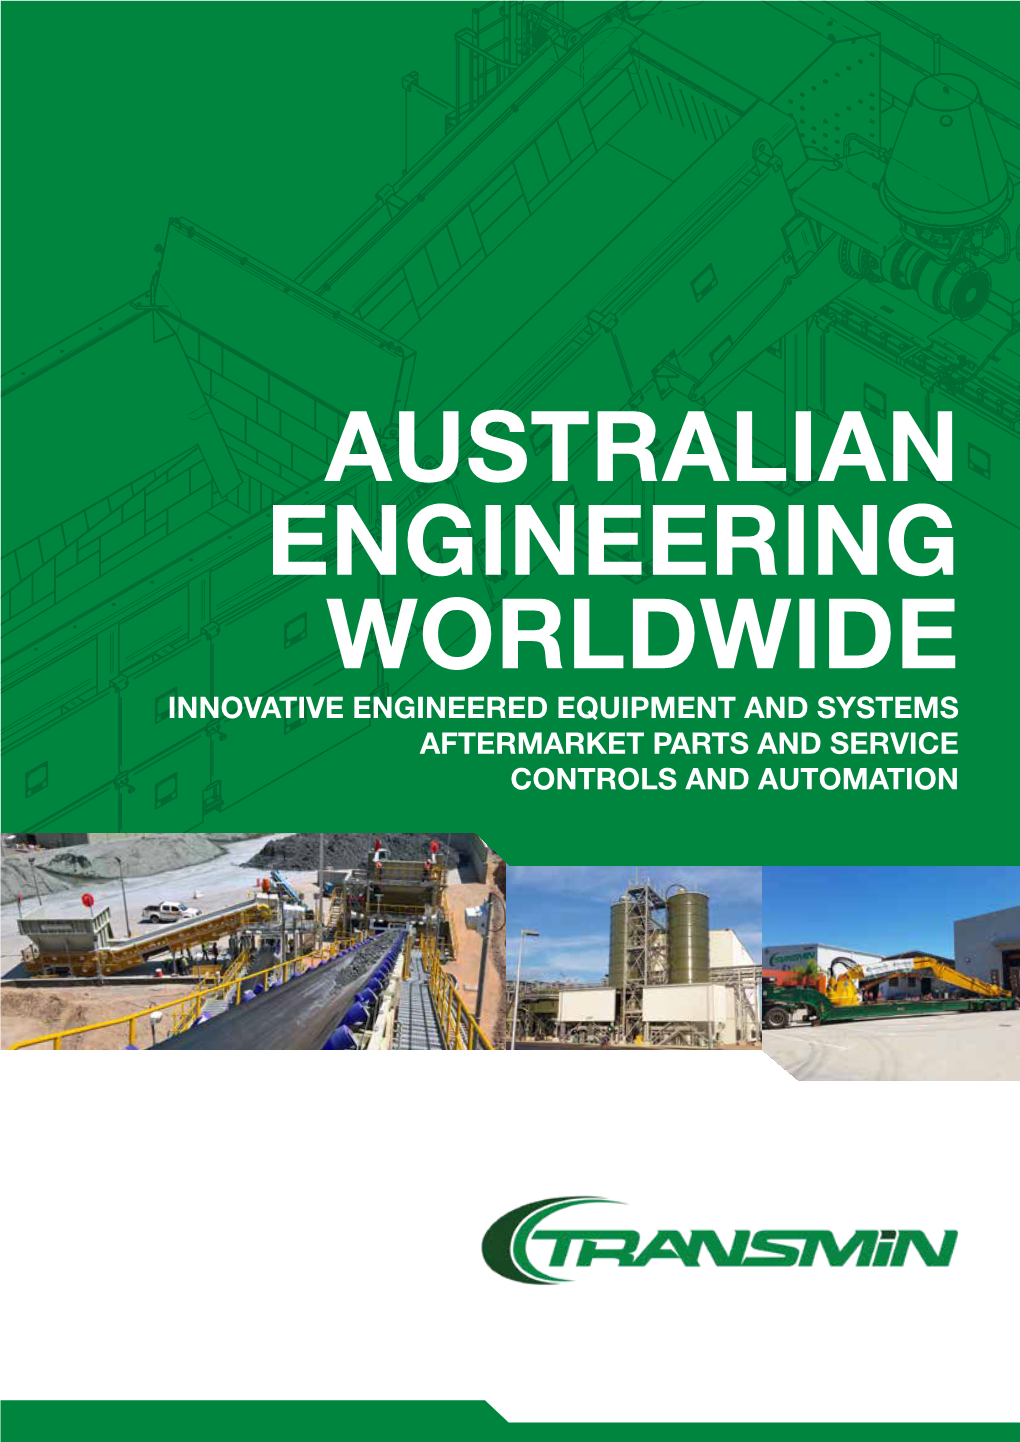 Australian Engineering Worldwide Innovative Engineered Equipment and Systems Aftermarket Parts and Service Controls and Automation Australian Engineering Worldwide